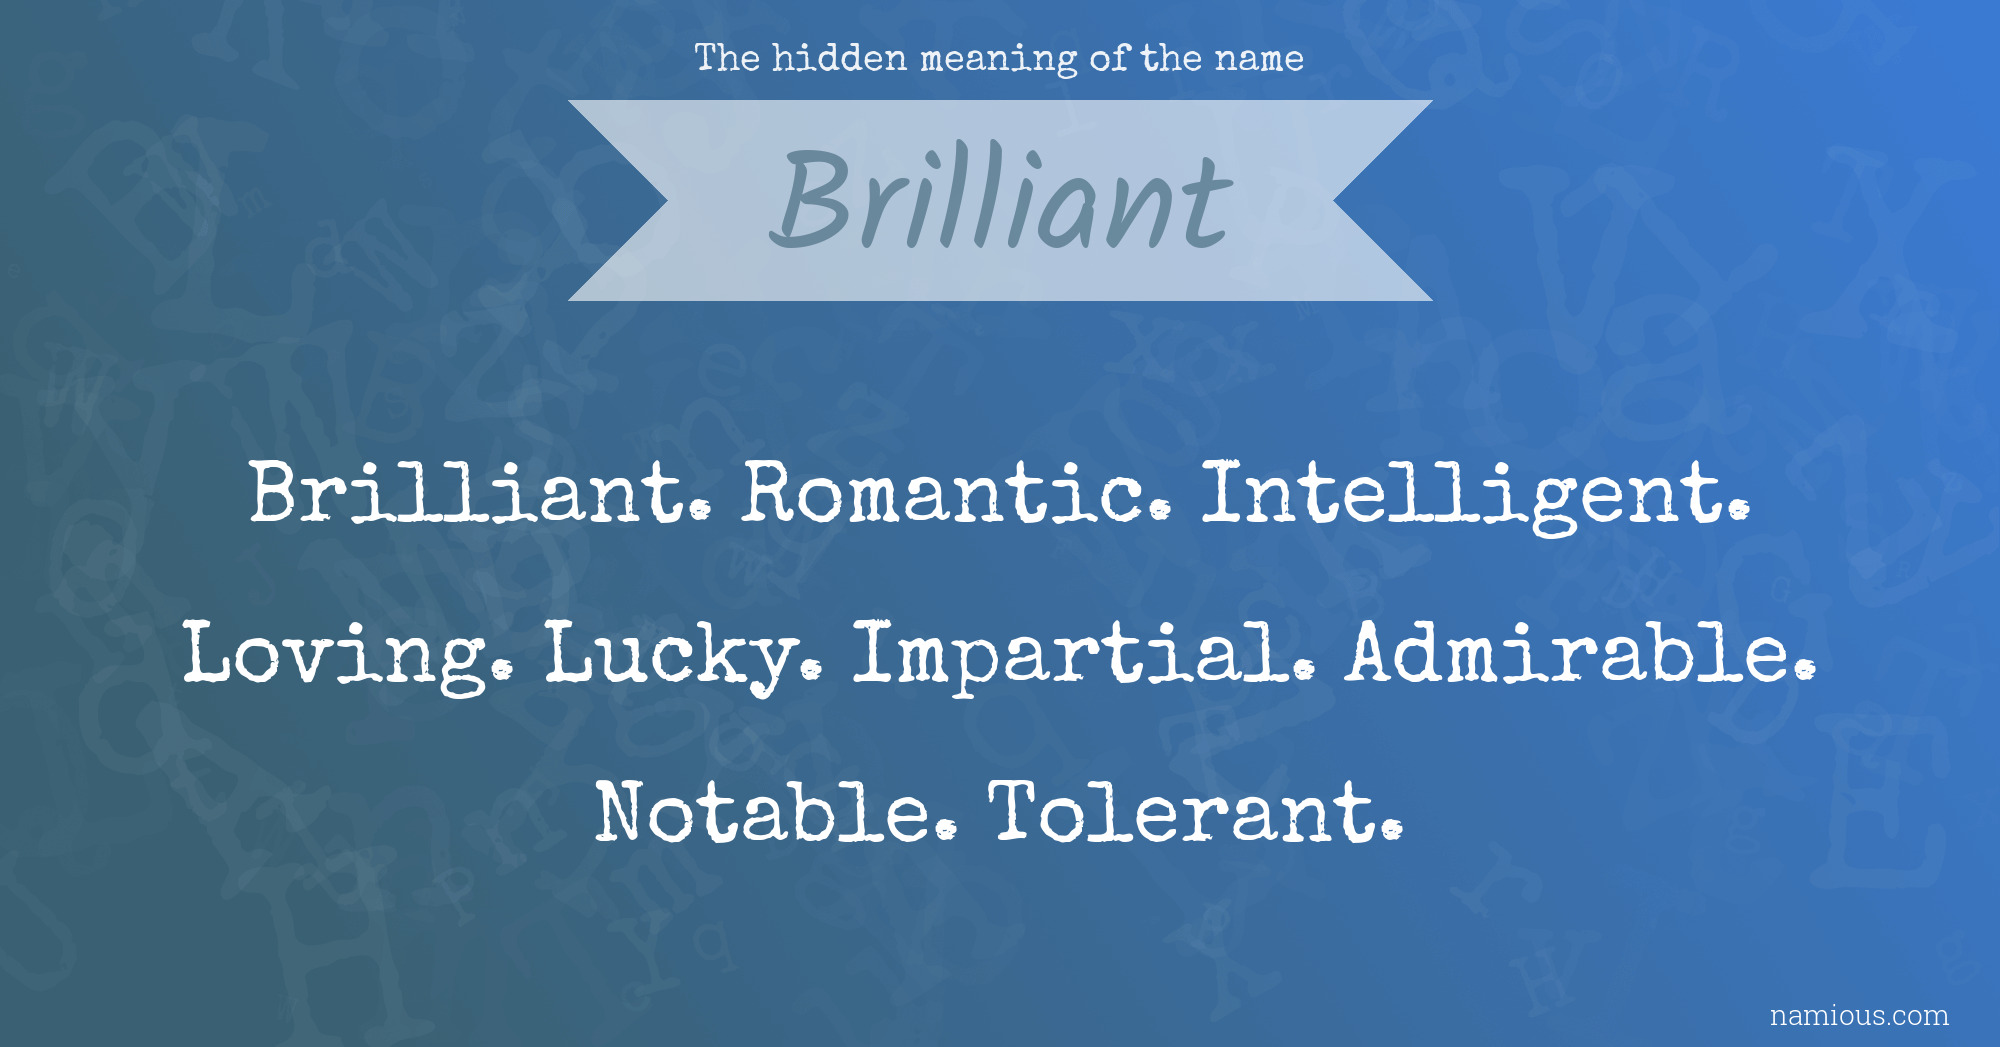 The hidden meaning of the name Brilliant